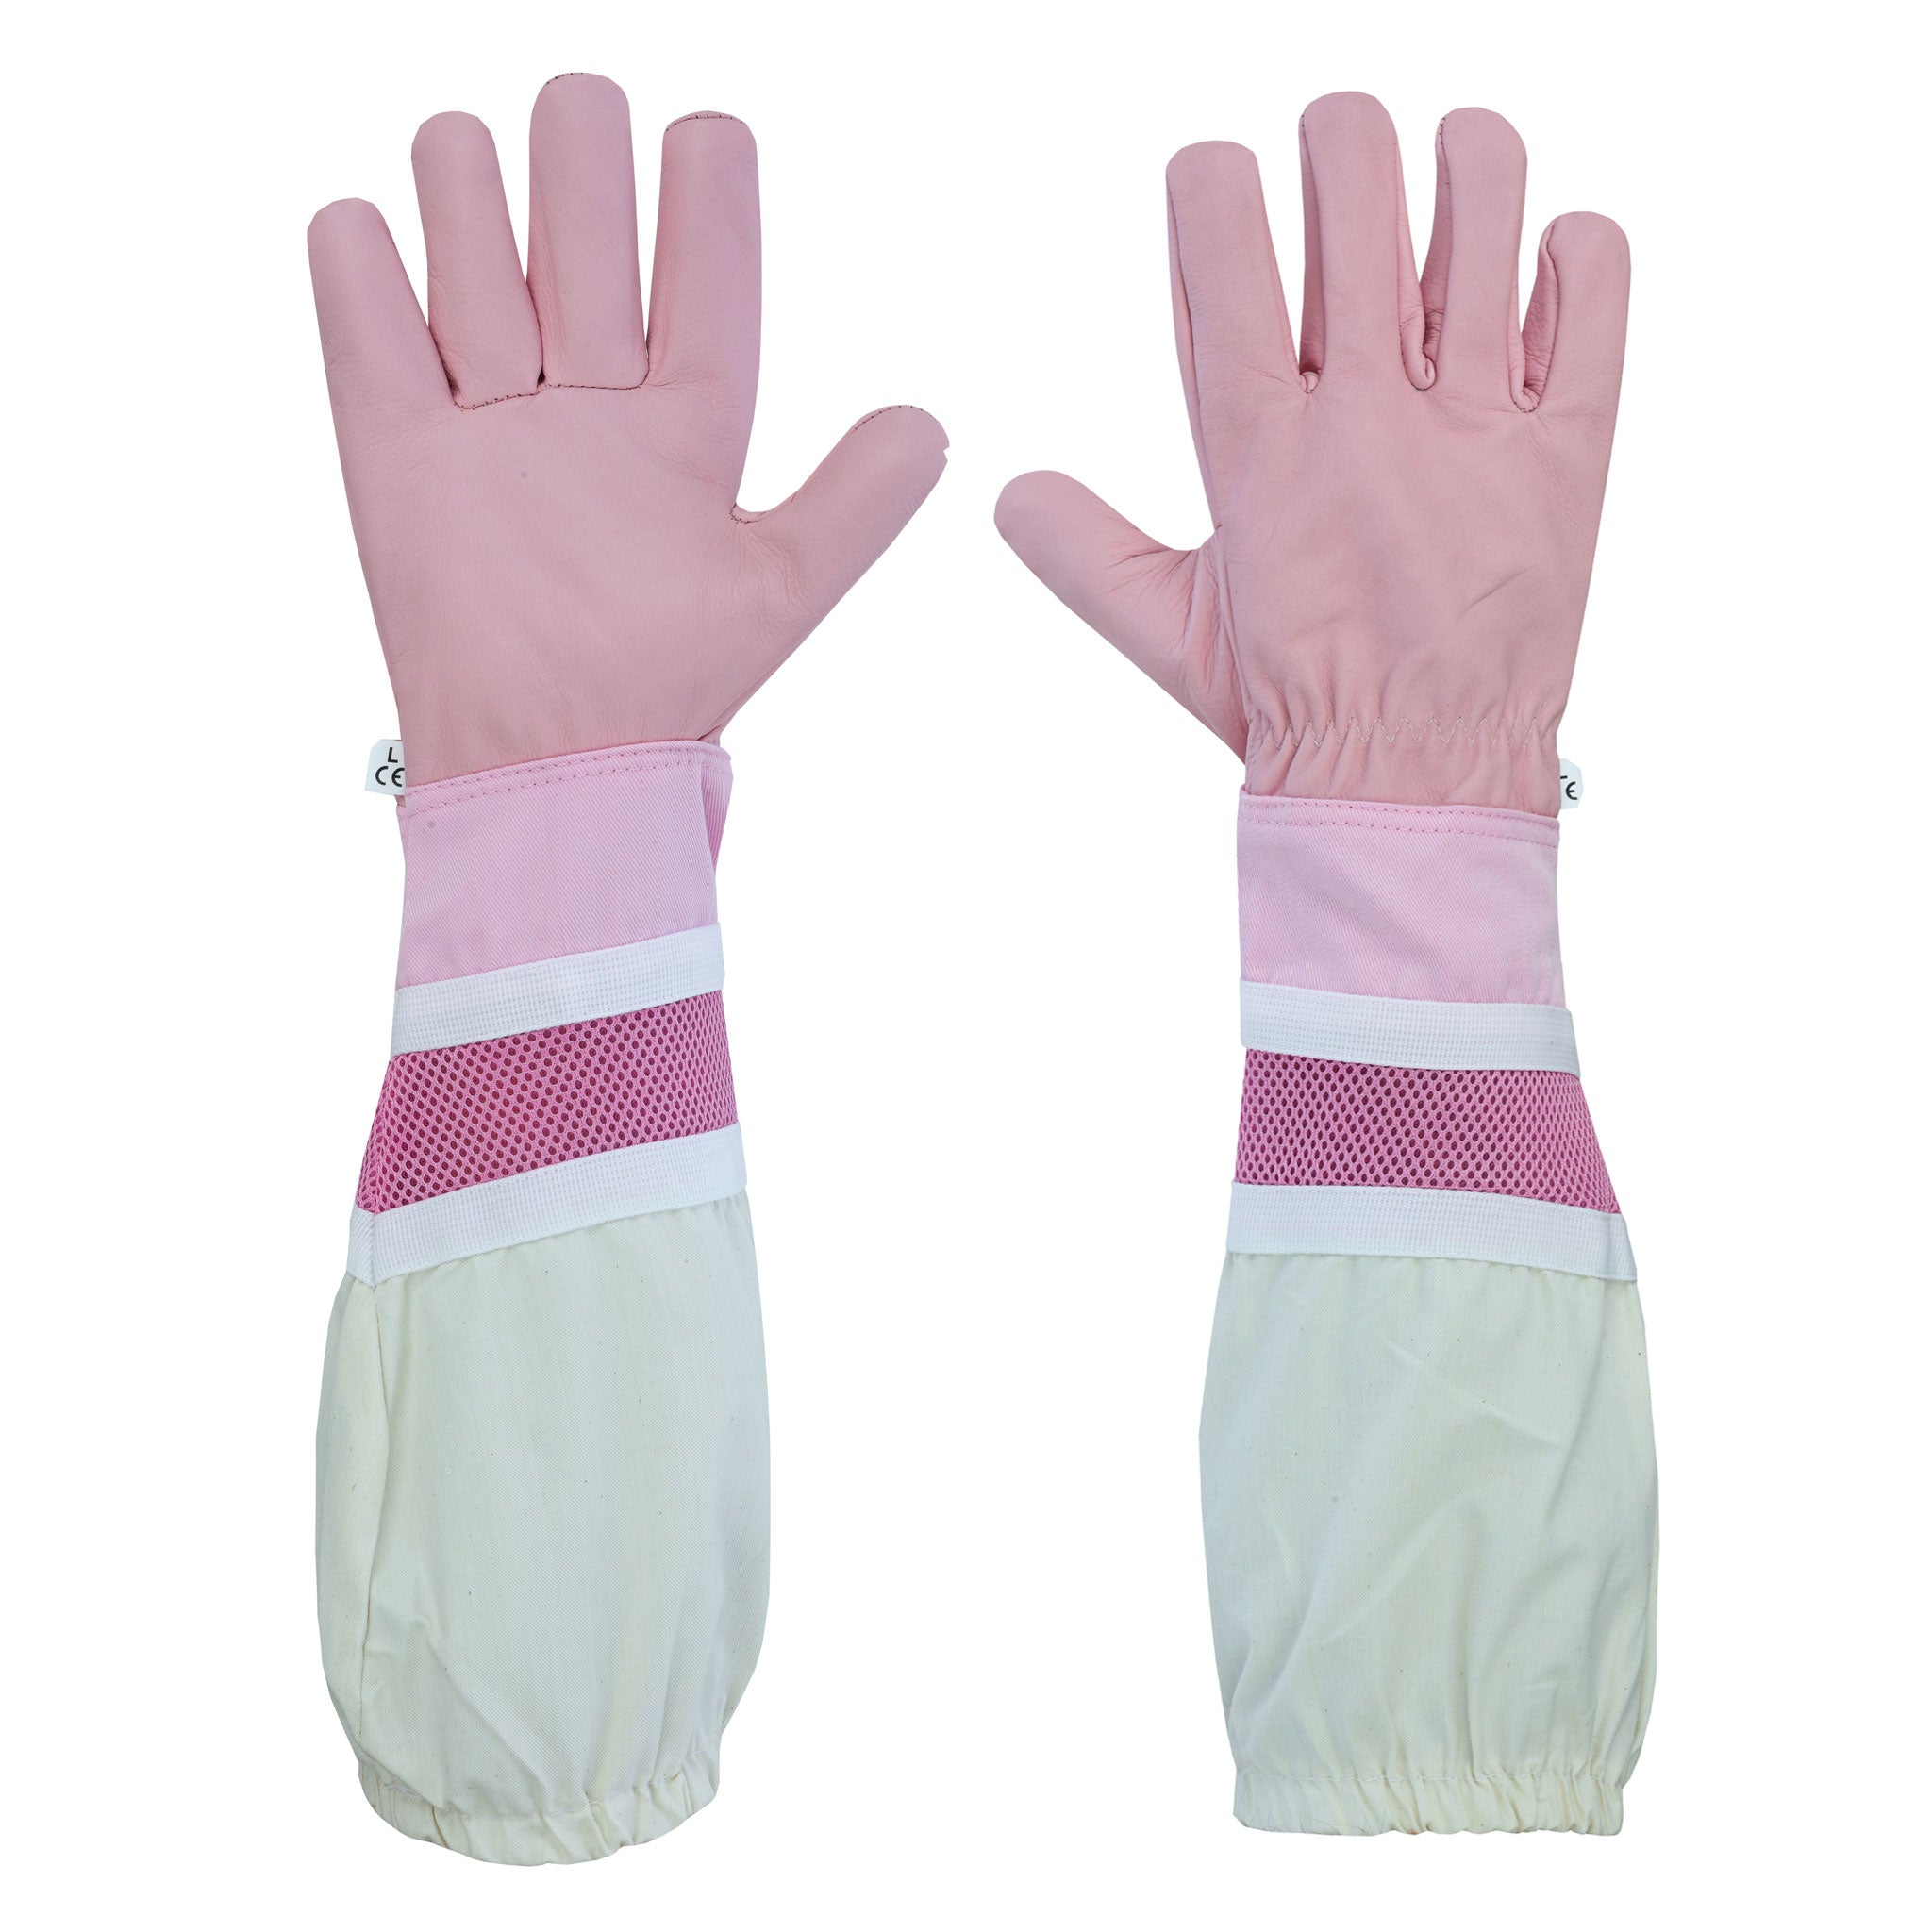 Pink Cow Hide Ventilated Gloves